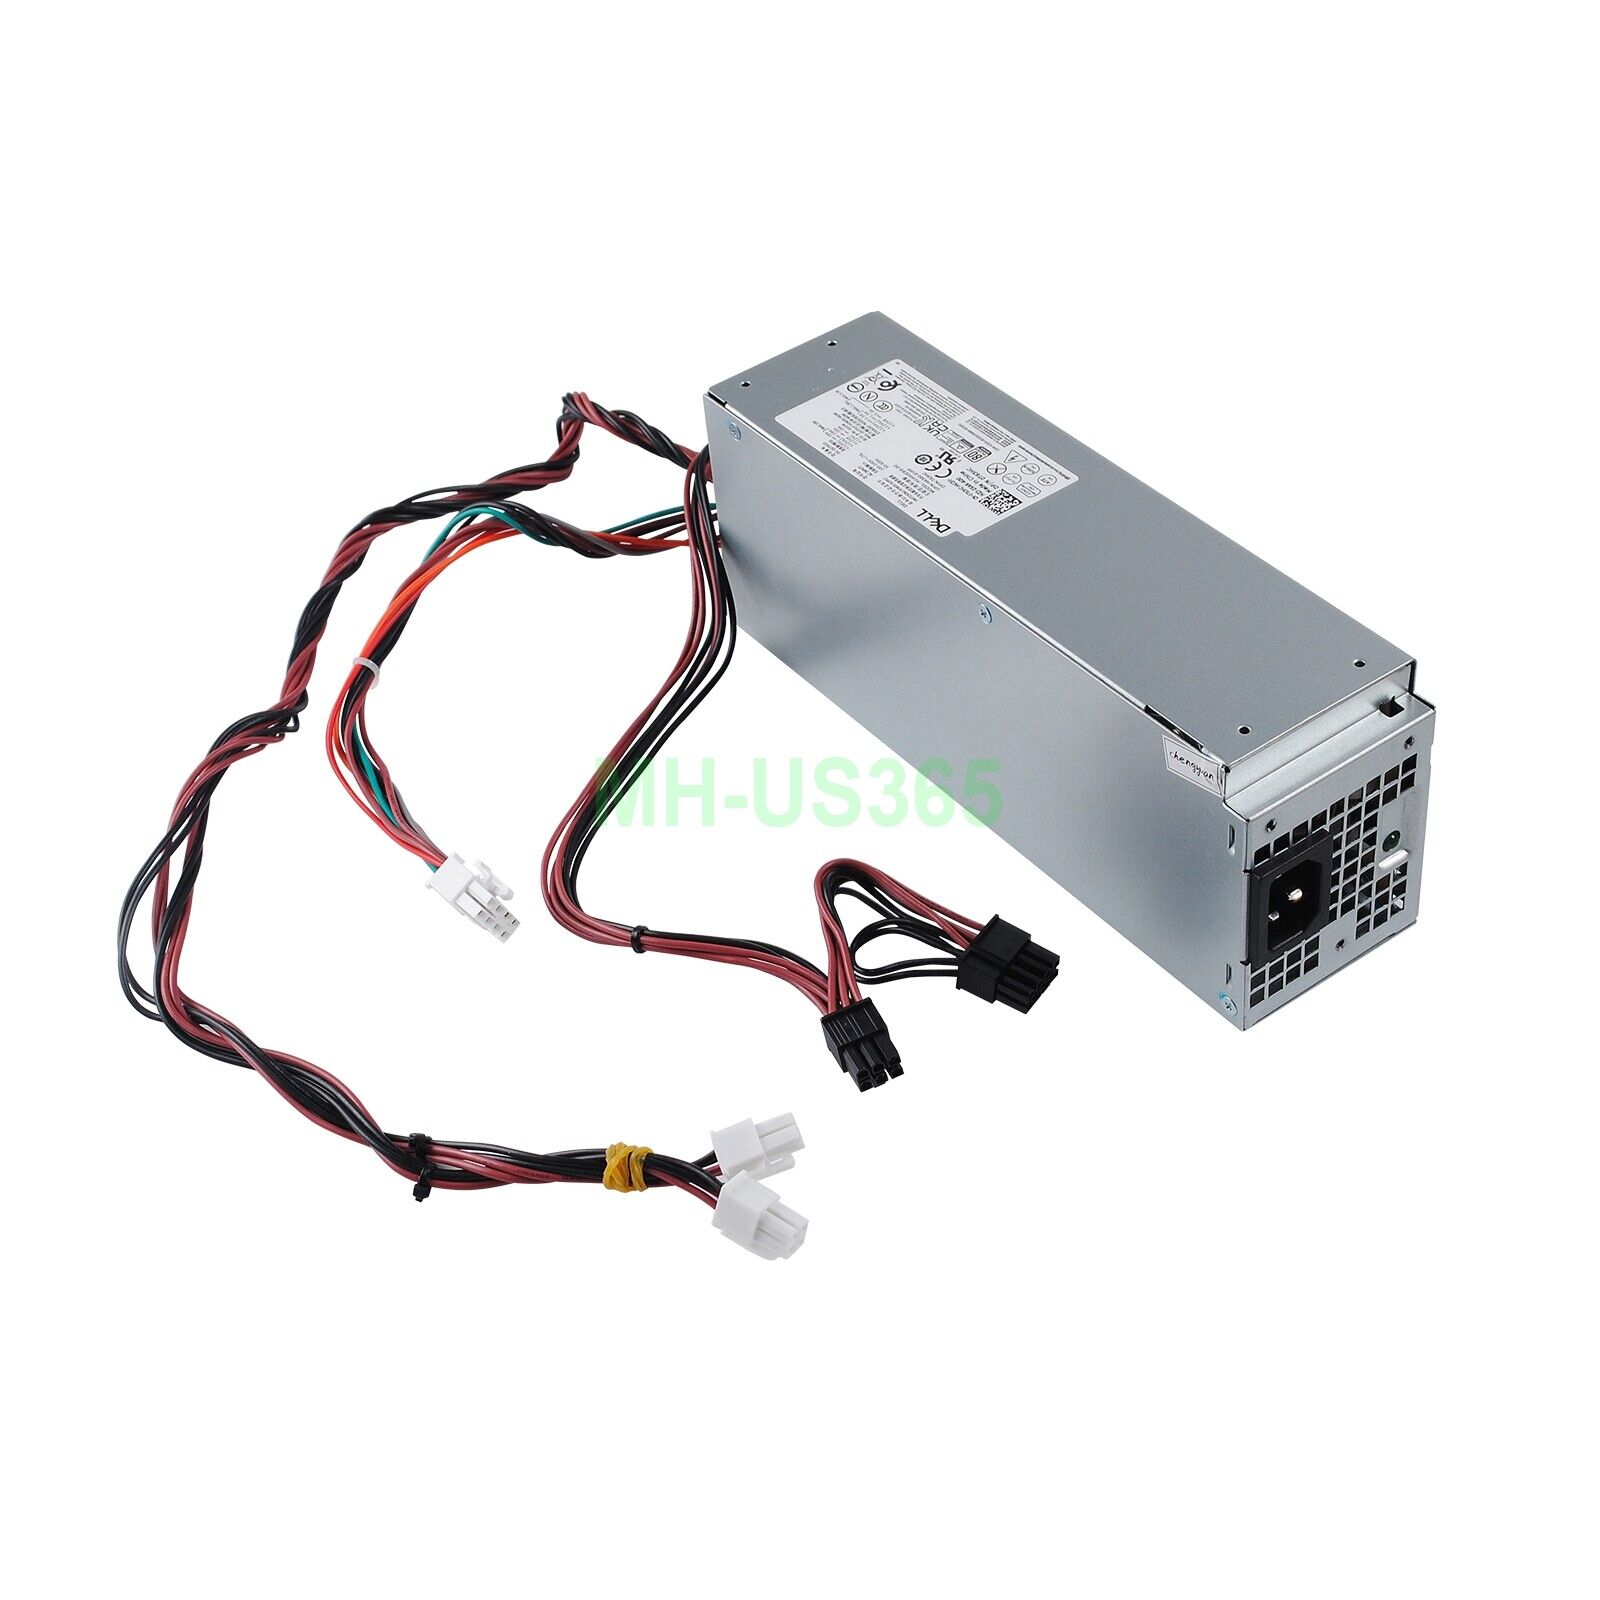 For Dell Power Supply HU460EBS00 AC460EBS00 460W Inspiron 3020 Vostro 3020